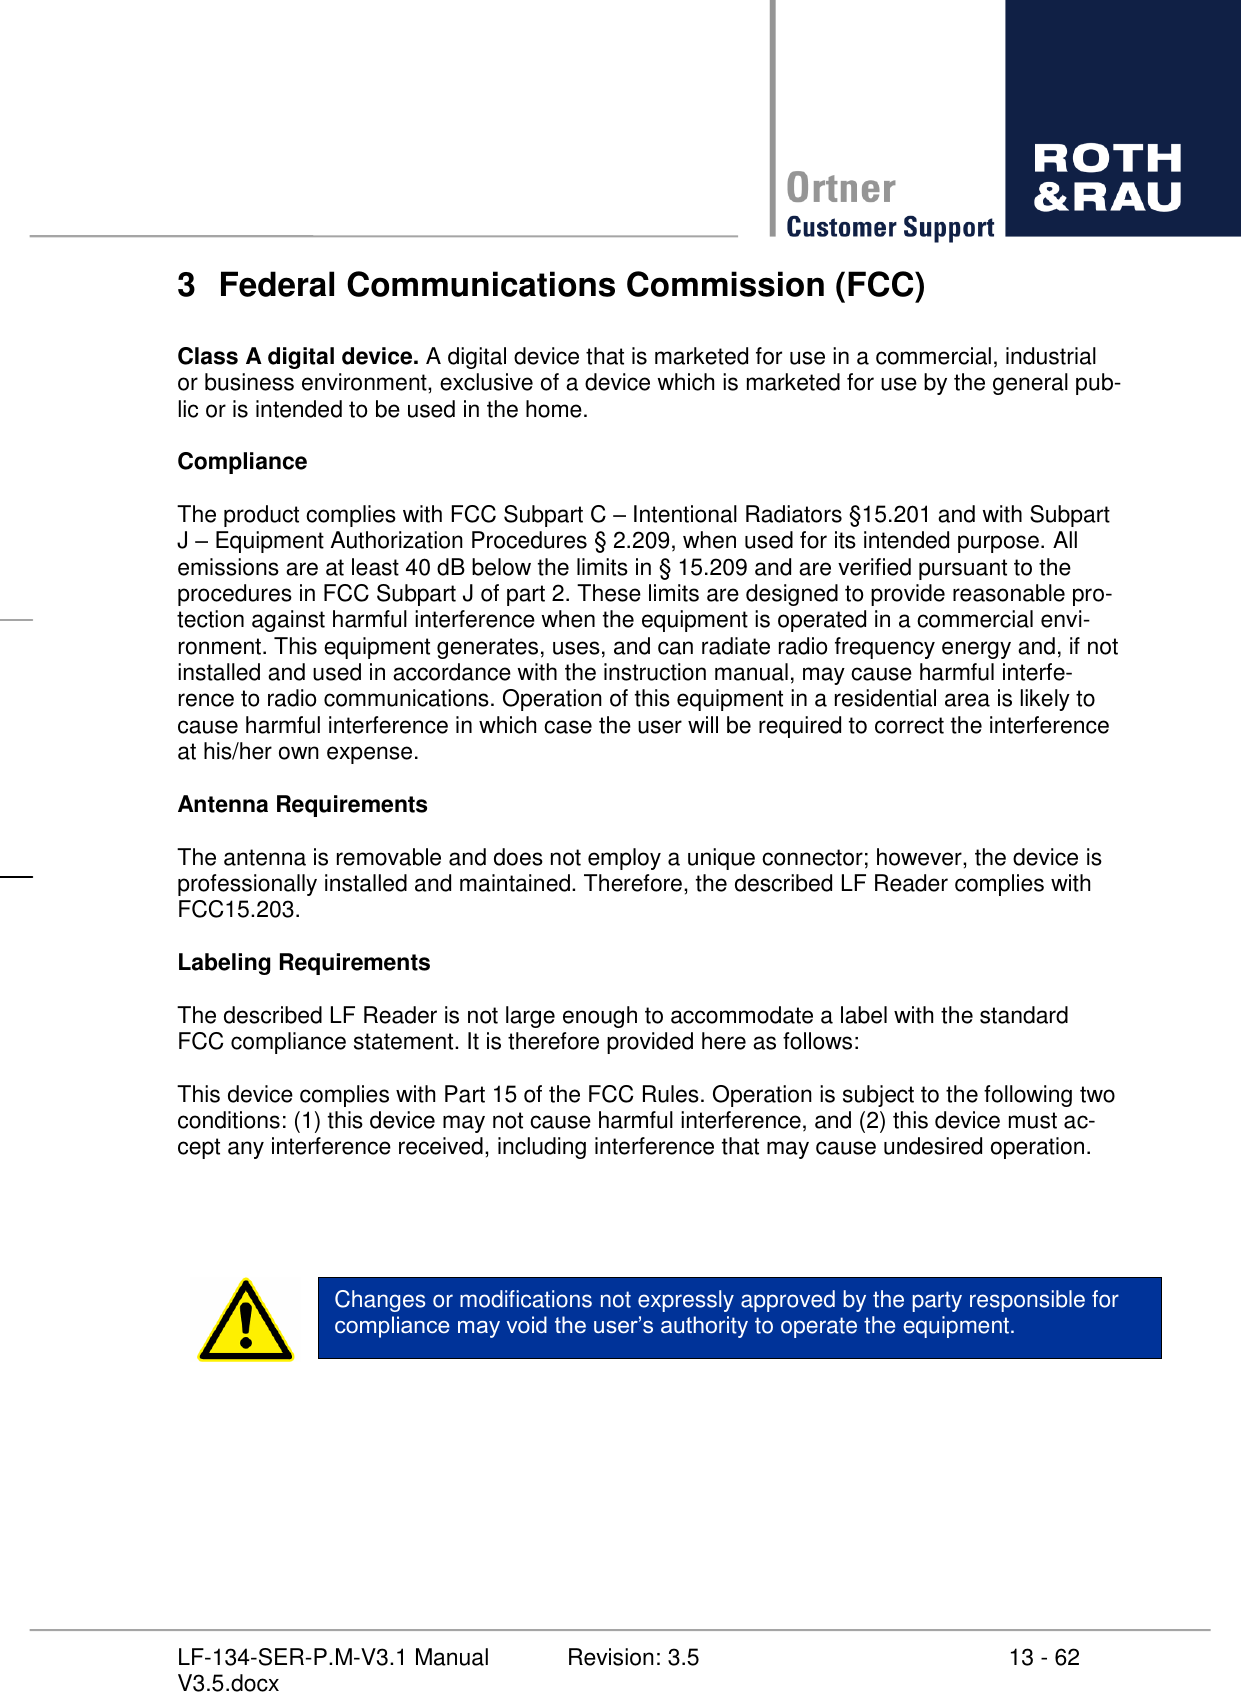     13 - 62 Revision: 3.5 LF-134-SER-P.M-V3.1 Manual V3.5.docx 3  Federal Communications Commission (FCC)  Class A digital device. A digital device that is marketed for use in a commercial, industrial or business environment, exclusive of a device which is marketed for use by the general pub-lic or is intended to be used in the home.  Compliance  The product complies with FCC Subpart C  Intentional Radiators §15.201 and with Subpart J  Equipment Authorization Procedures § 2.209, when used for its intended purpose. All emissions are at least 40 dB below the limits in § 15.209 and are verified pursuant to the procedures in FCC Subpart J of part 2. These limits are designed to provide reasonable pro-tection against harmful interference when the equipment is operated in a commercial envi-ronment. This equipment generates, uses, and can radiate radio frequency energy and, if not installed and used in accordance with the instruction manual, may cause harmful interfe-rence to radio communications. Operation of this equipment in a residential area is likely to cause harmful interference in which case the user will be required to correct the interference at his/her own expense.  Antenna Requirements  The antenna is removable and does not employ a unique connector; however, the device is professionally installed and maintained. Therefore, the described LF Reader complies with FCC15.203.  Labeling Requirements  The described LF Reader is not large enough to accommodate a label with the standard FCC compliance statement. It is therefore provided here as follows:  This device complies with Part 15 of the FCC Rules. Operation is subject to the following two conditions: (1) this device may not cause harmful interference, and (2) this device must ac-cept any interference received, including interference that may cause undesired operation.   Changes or modifications not expressly approved by the party responsible for rity to operate the equipment.        